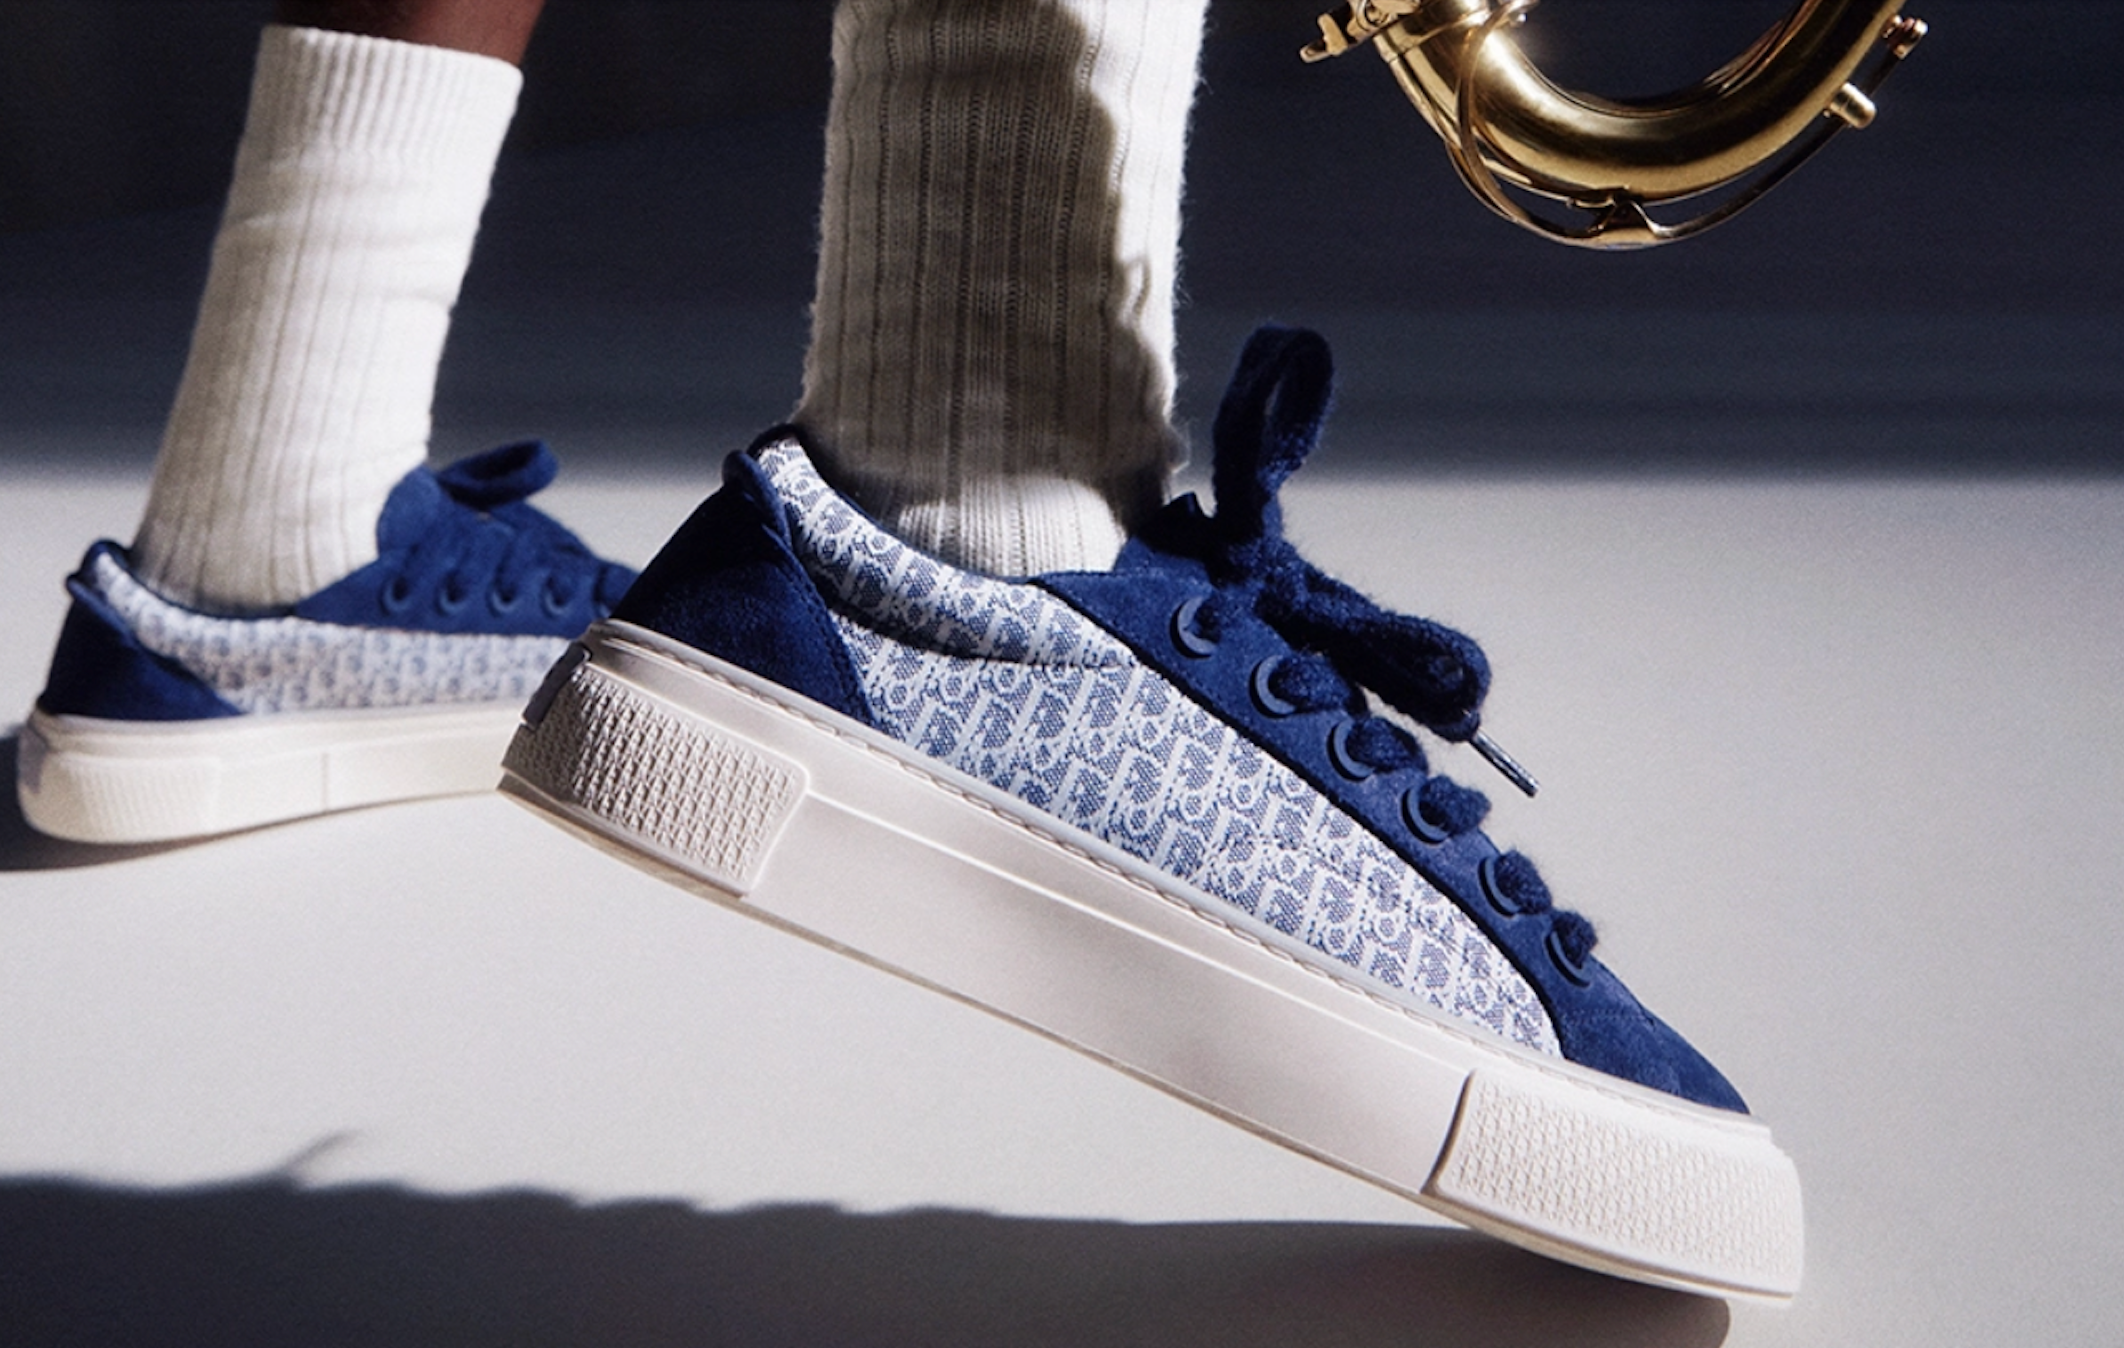 Dior has jumped on the NFT revival and released its latest sneaker complete with its own digital twin. Is it enough to win over consumers? Photo: Dior